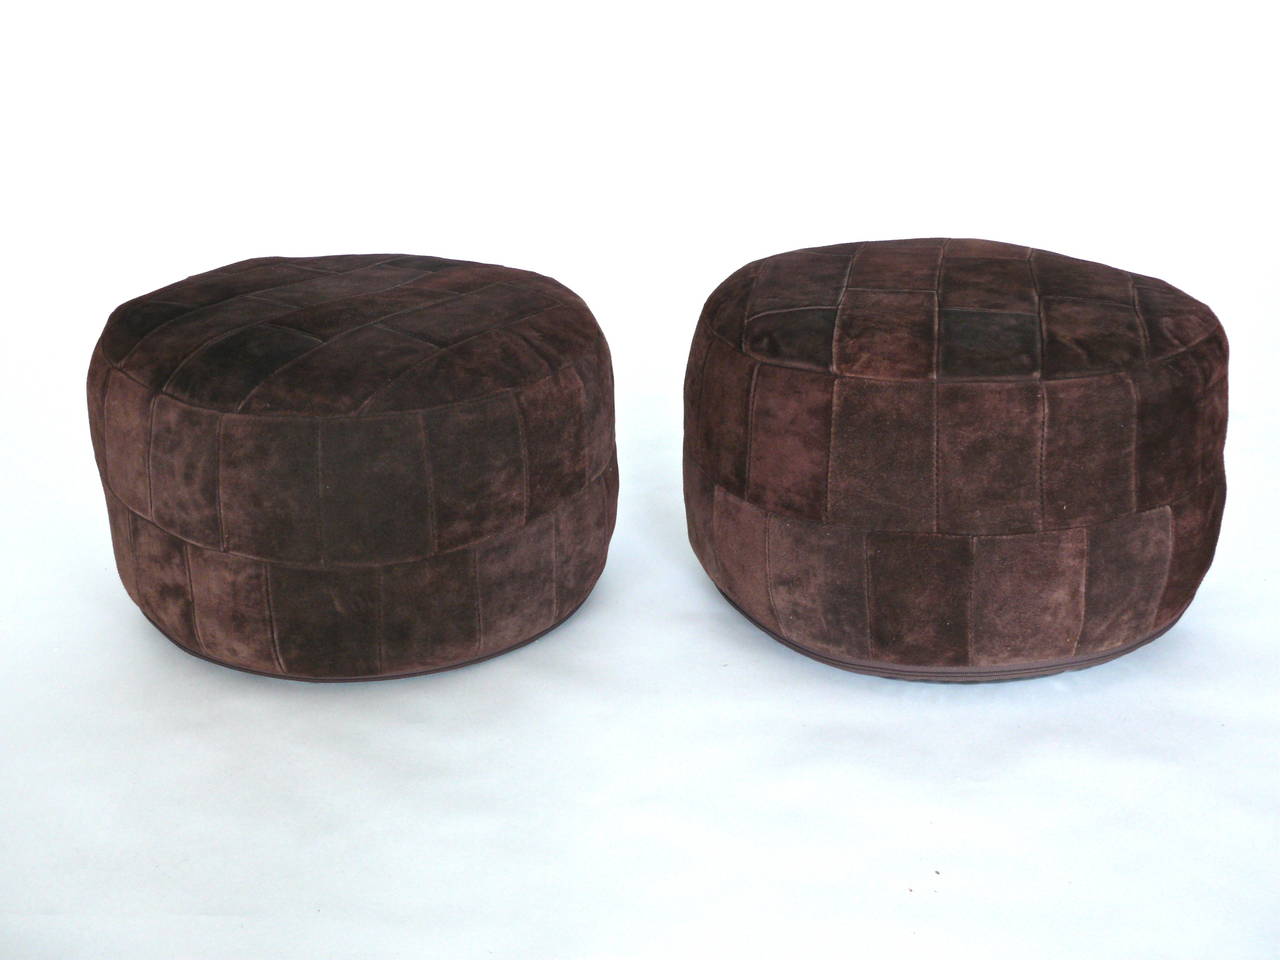 Fanstastic pair of chocolate suede, patchwork ottomans by De Sede. Original suede in excellent condition. Filled with beans. Perfect size.